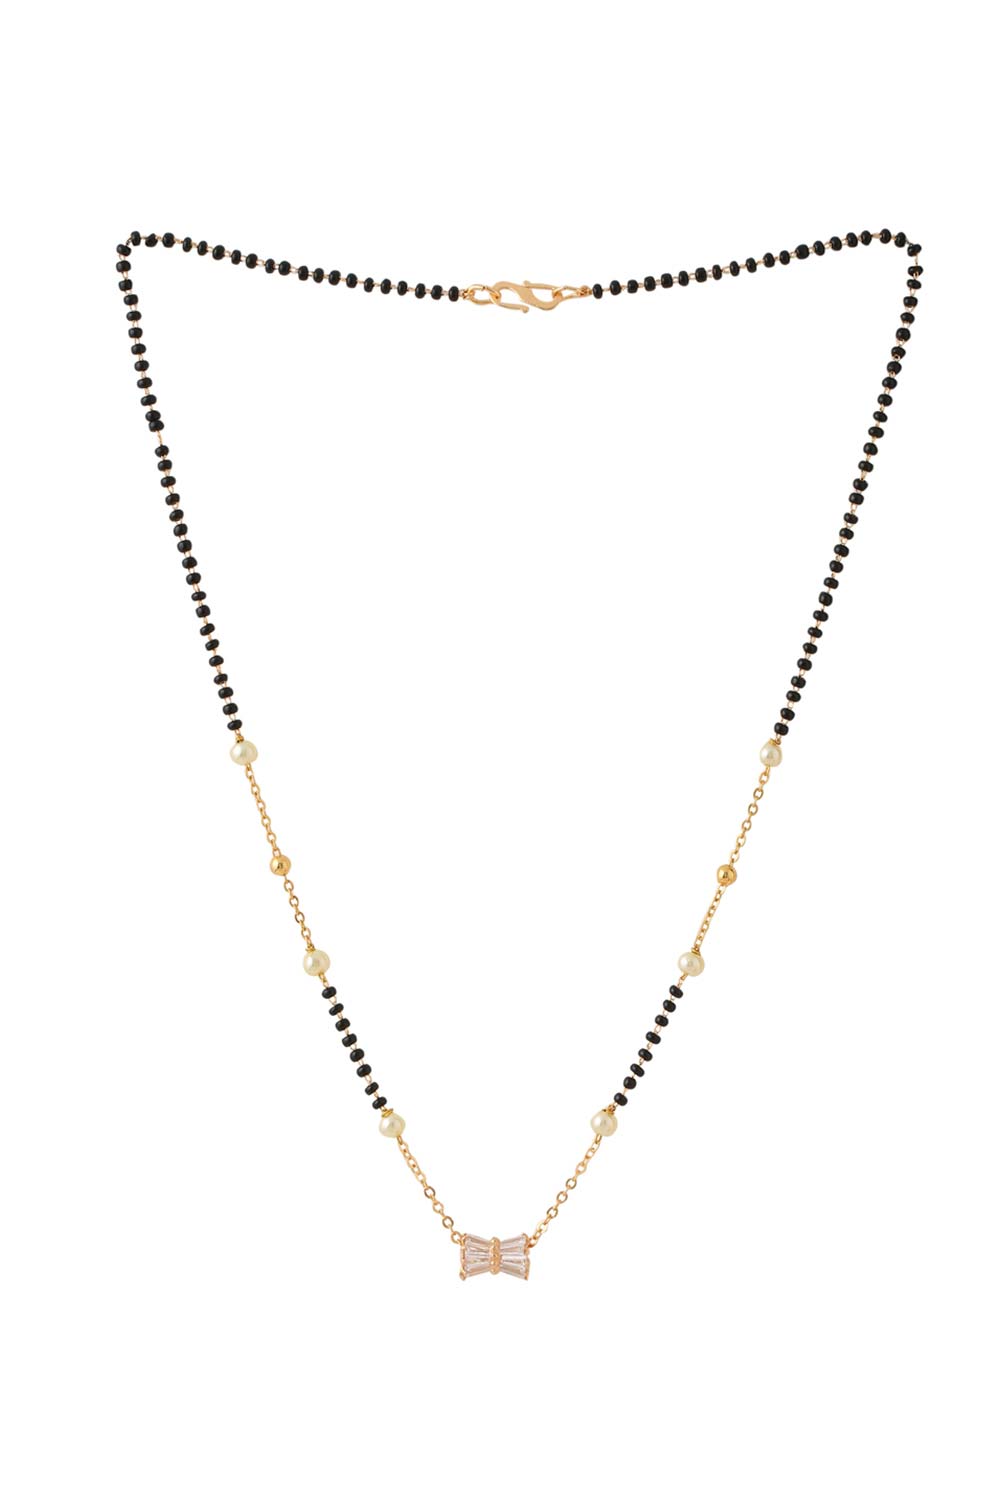 Buy Gold plated And Black Beads Ad Studded Mangalsutra Necklace Online - Front